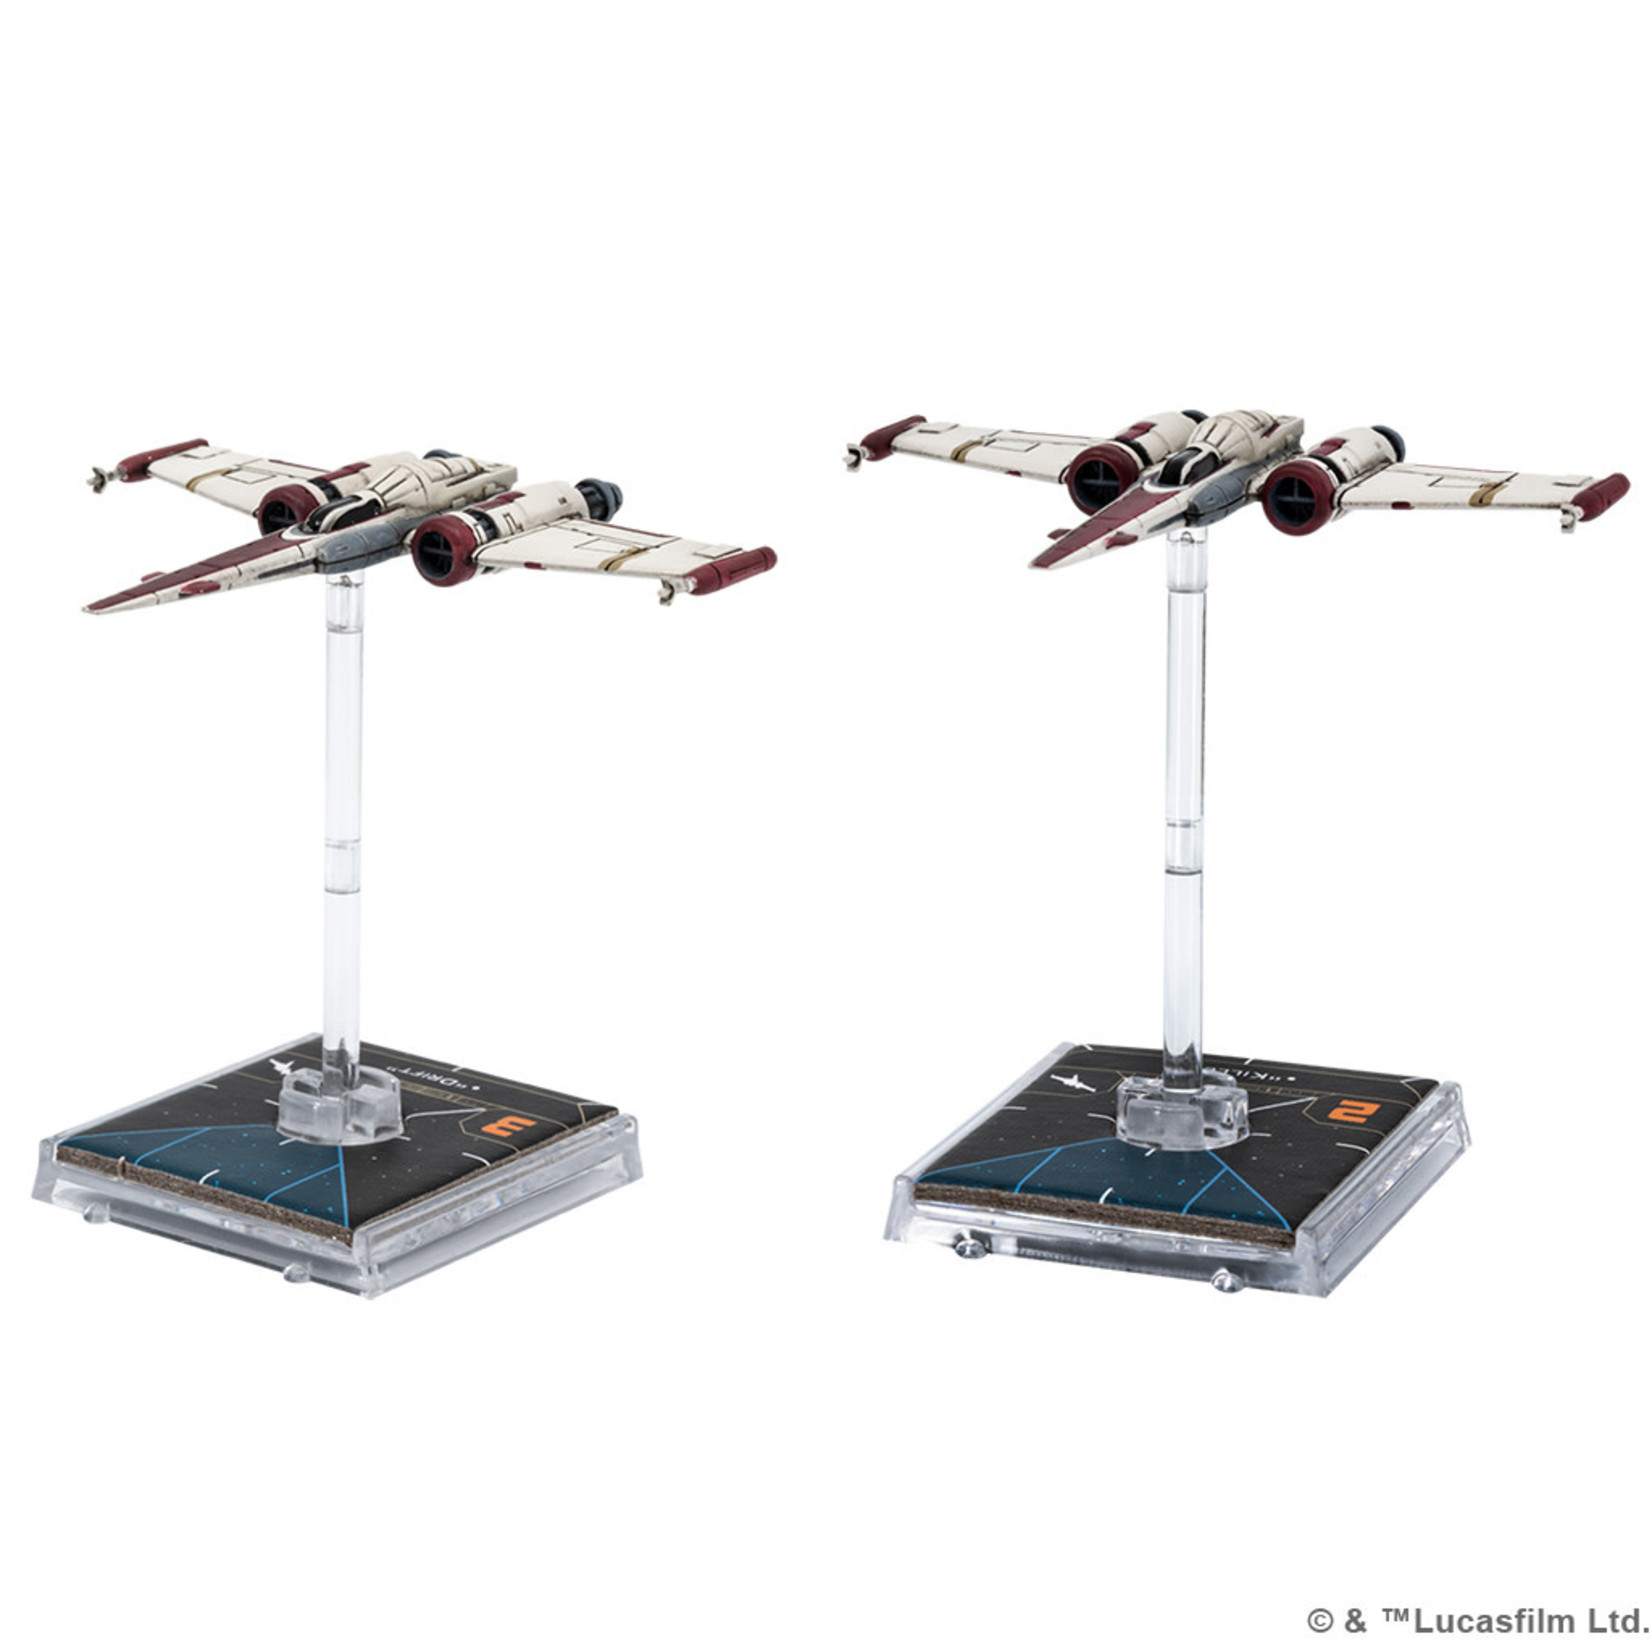 Fantasy Flight Games X-Wing 2.0: Clone Z-95 Headhunter Expansion Pack